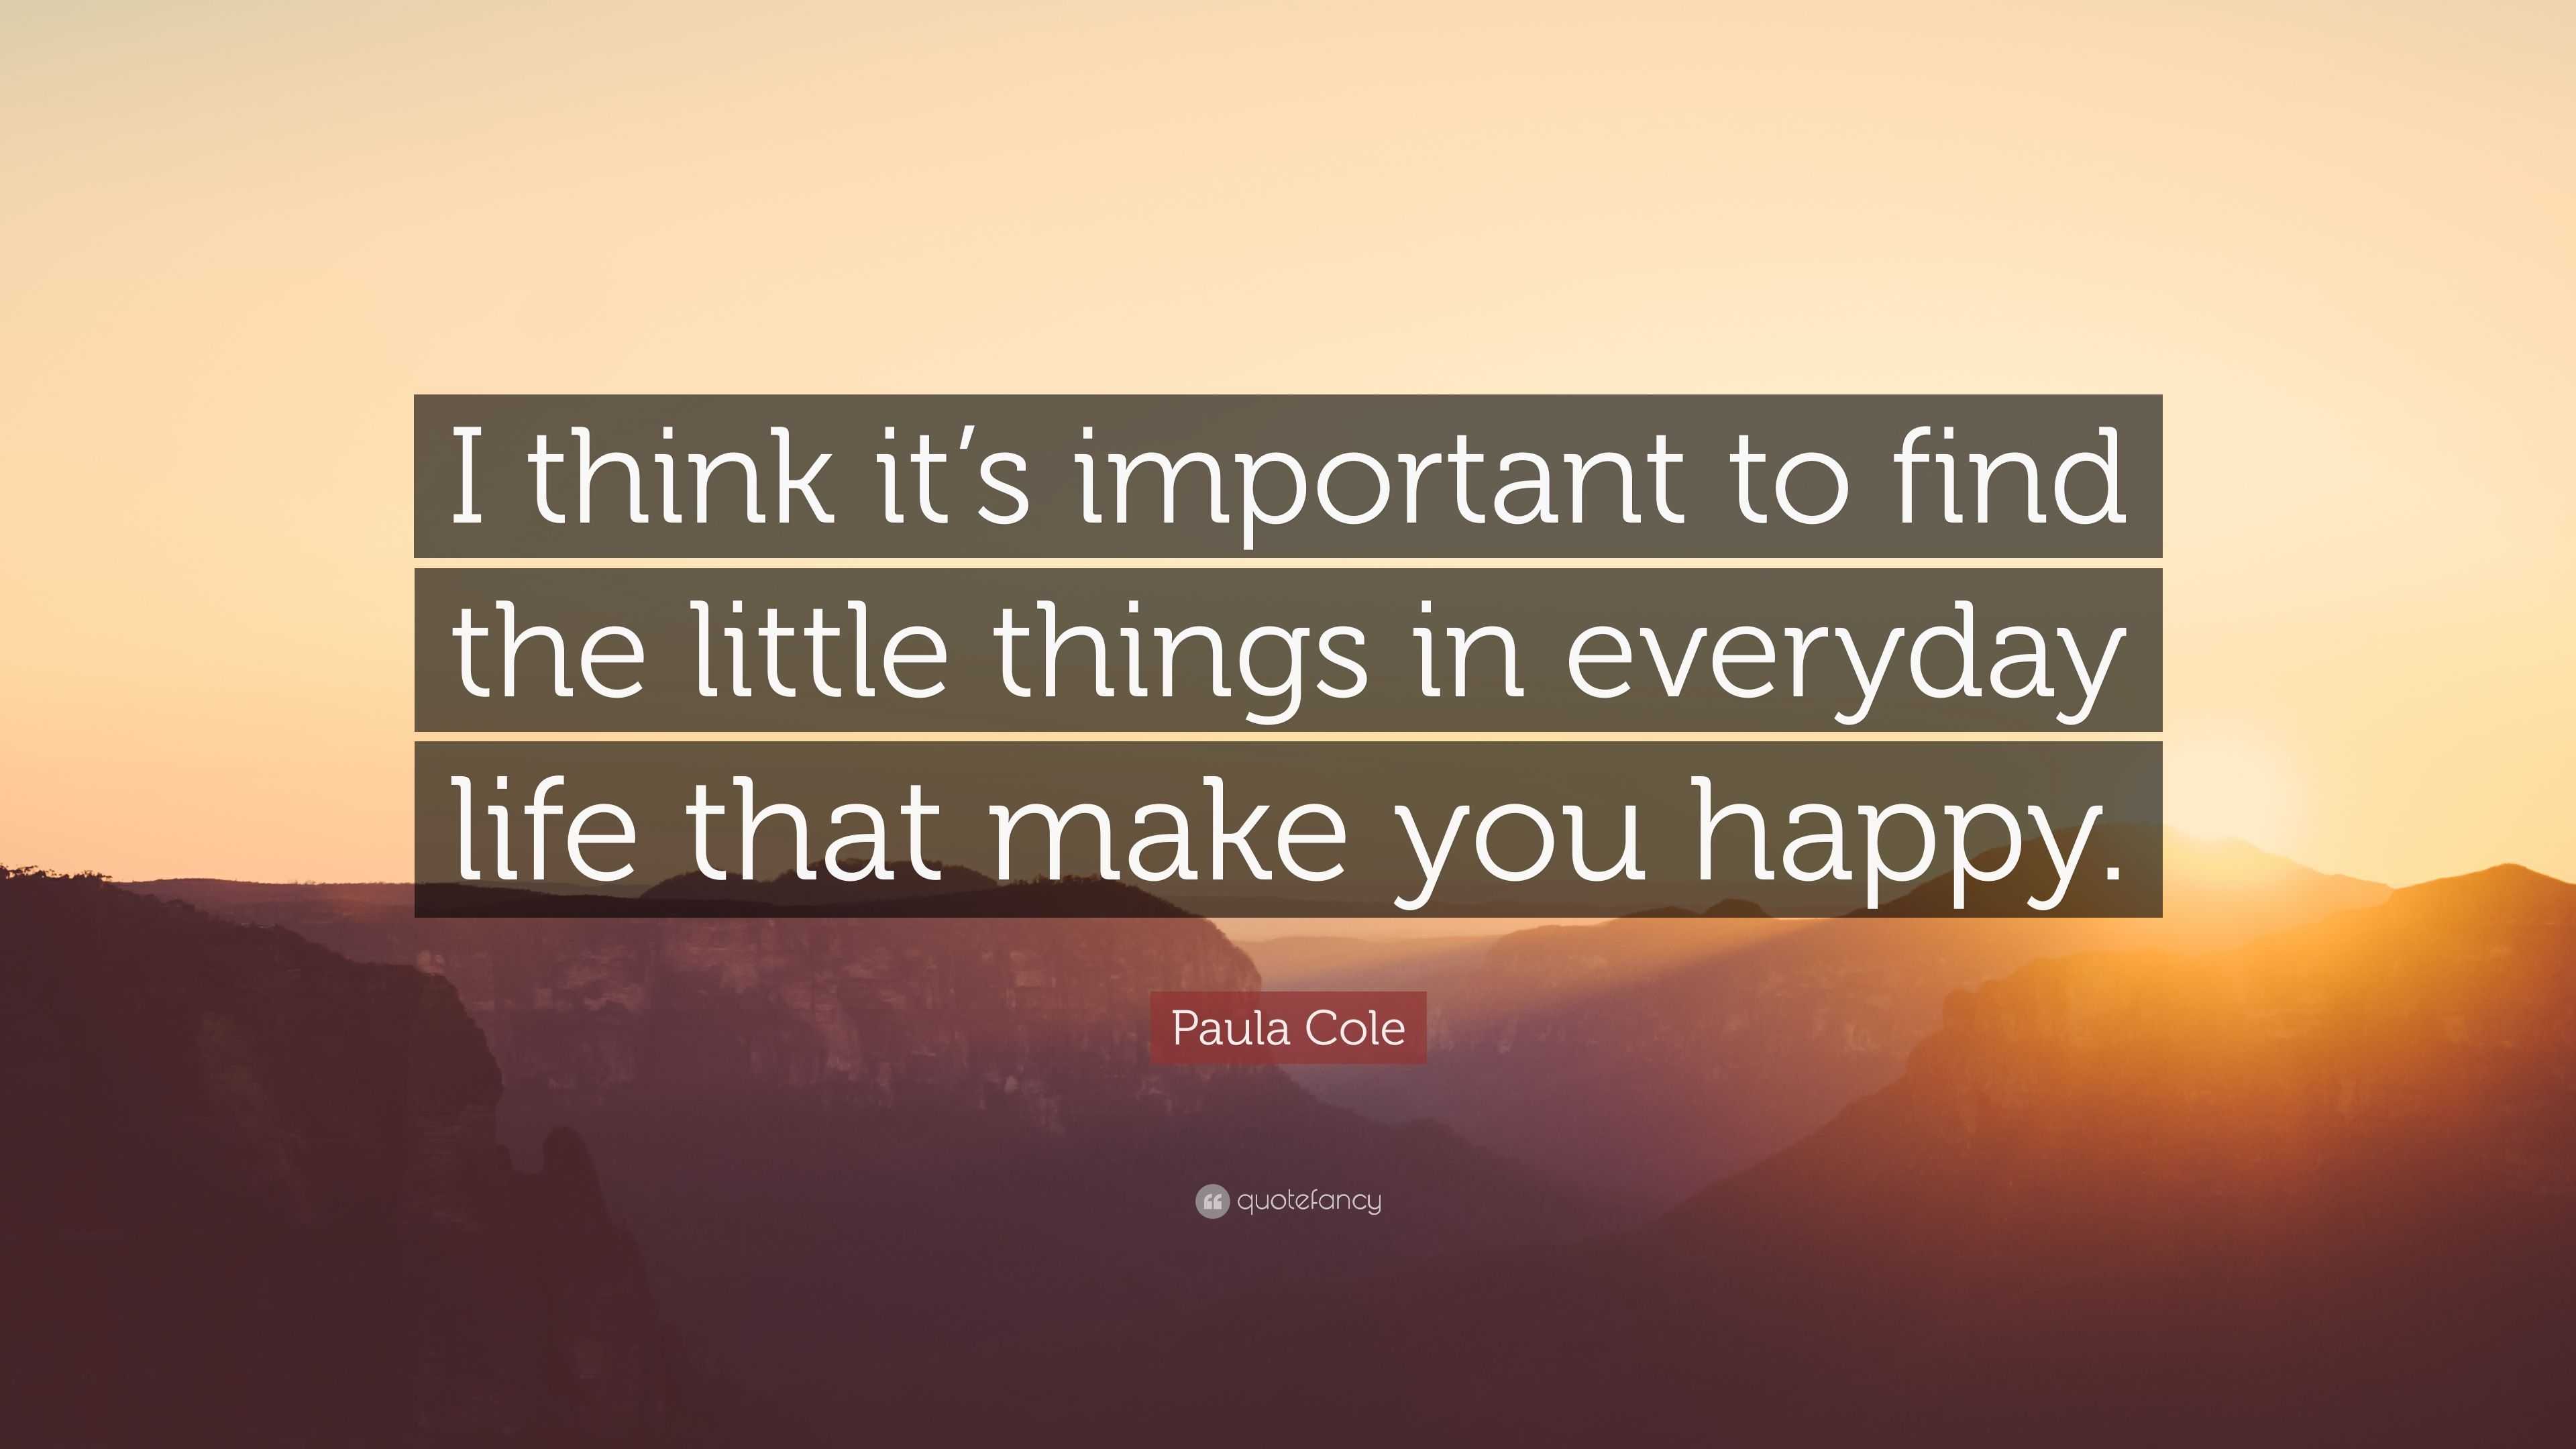 Paula Cole Quote: “I it's important find the little things everyday life that